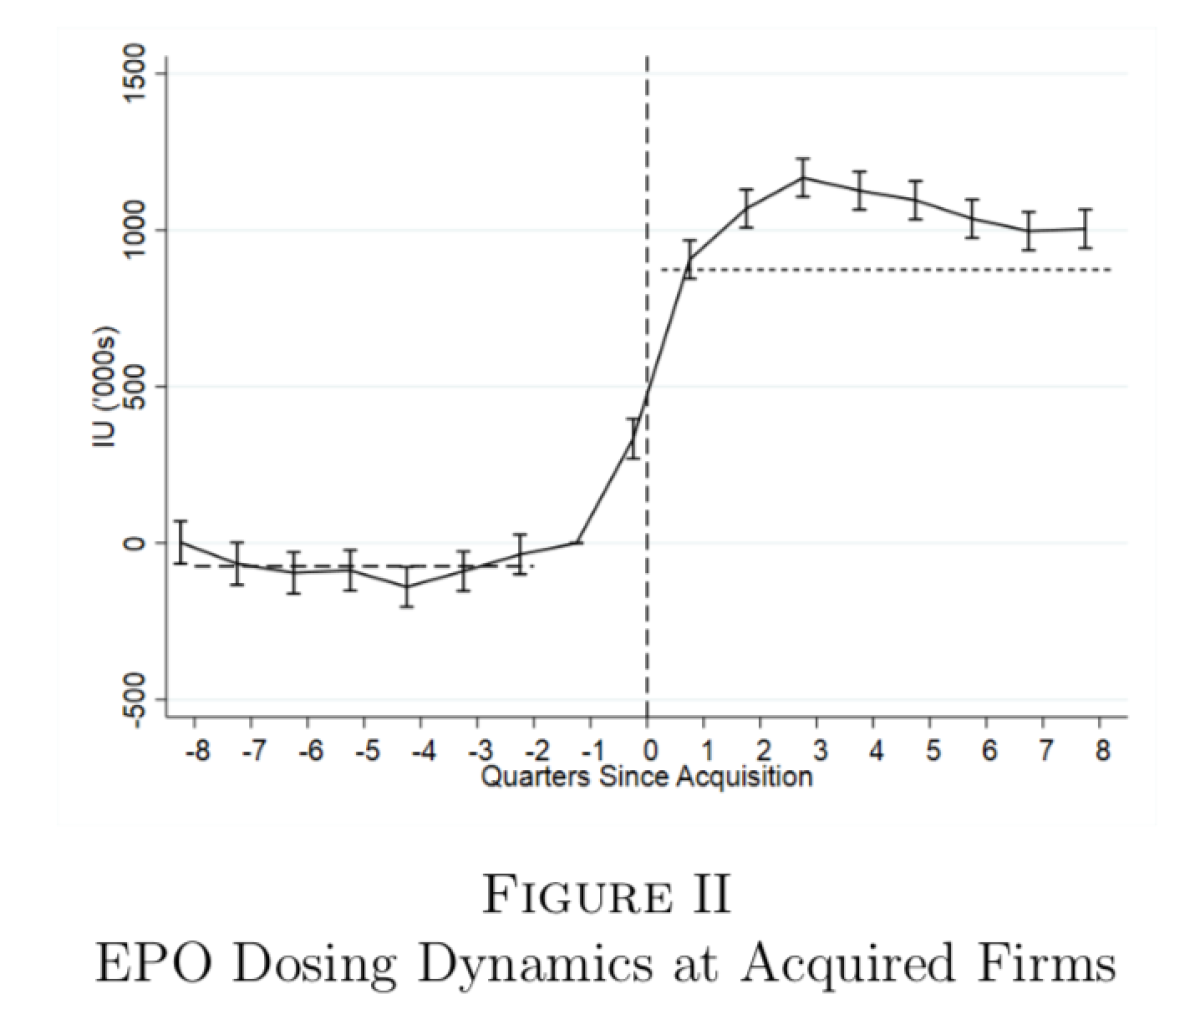 Patients' EPO doses, which were reimbursed by Medicare prior to 2011, soared at dialysis centers after their acquisition by for-profit chains.